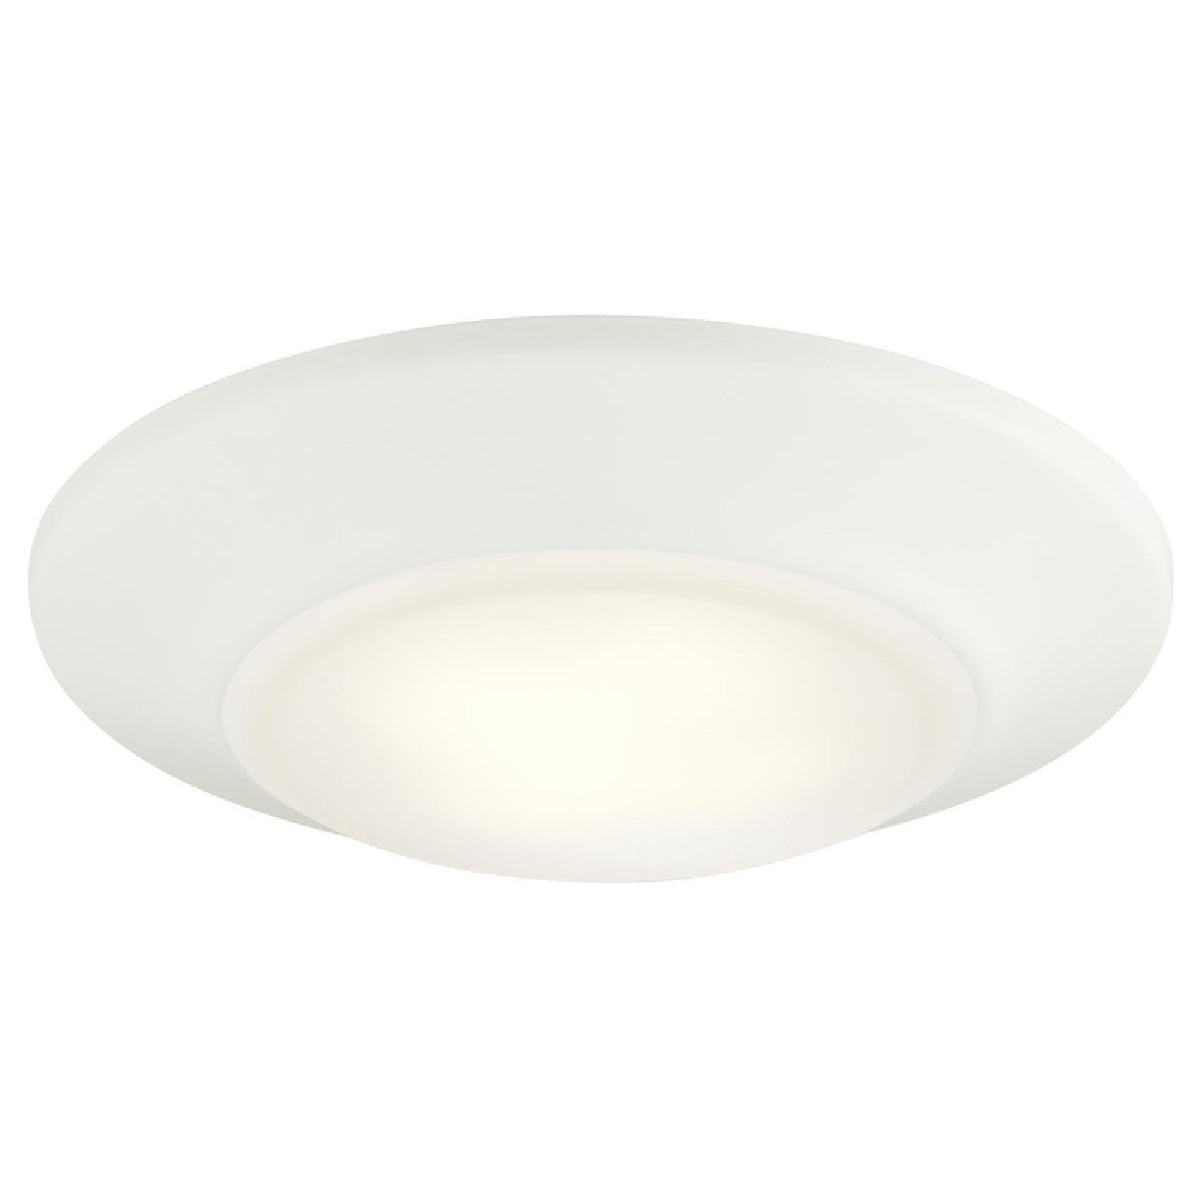 Westinghouse 63221 LED Recessed Light Fixture, White, 12 watts